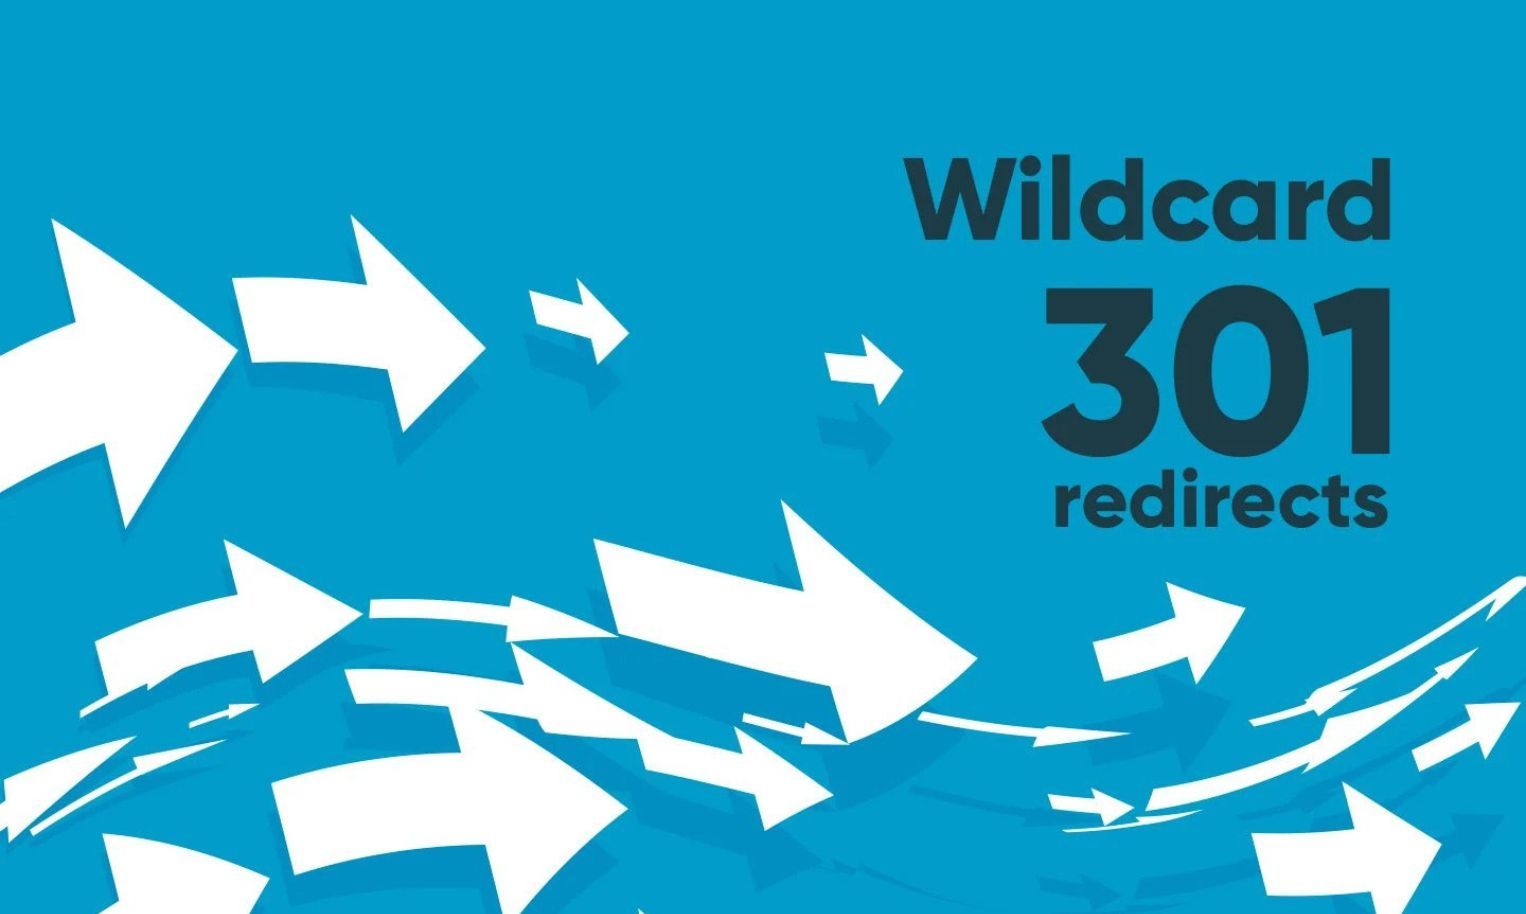 *Wildcard Redirects: Boost SEO by Routing *.domain.com to Main Site